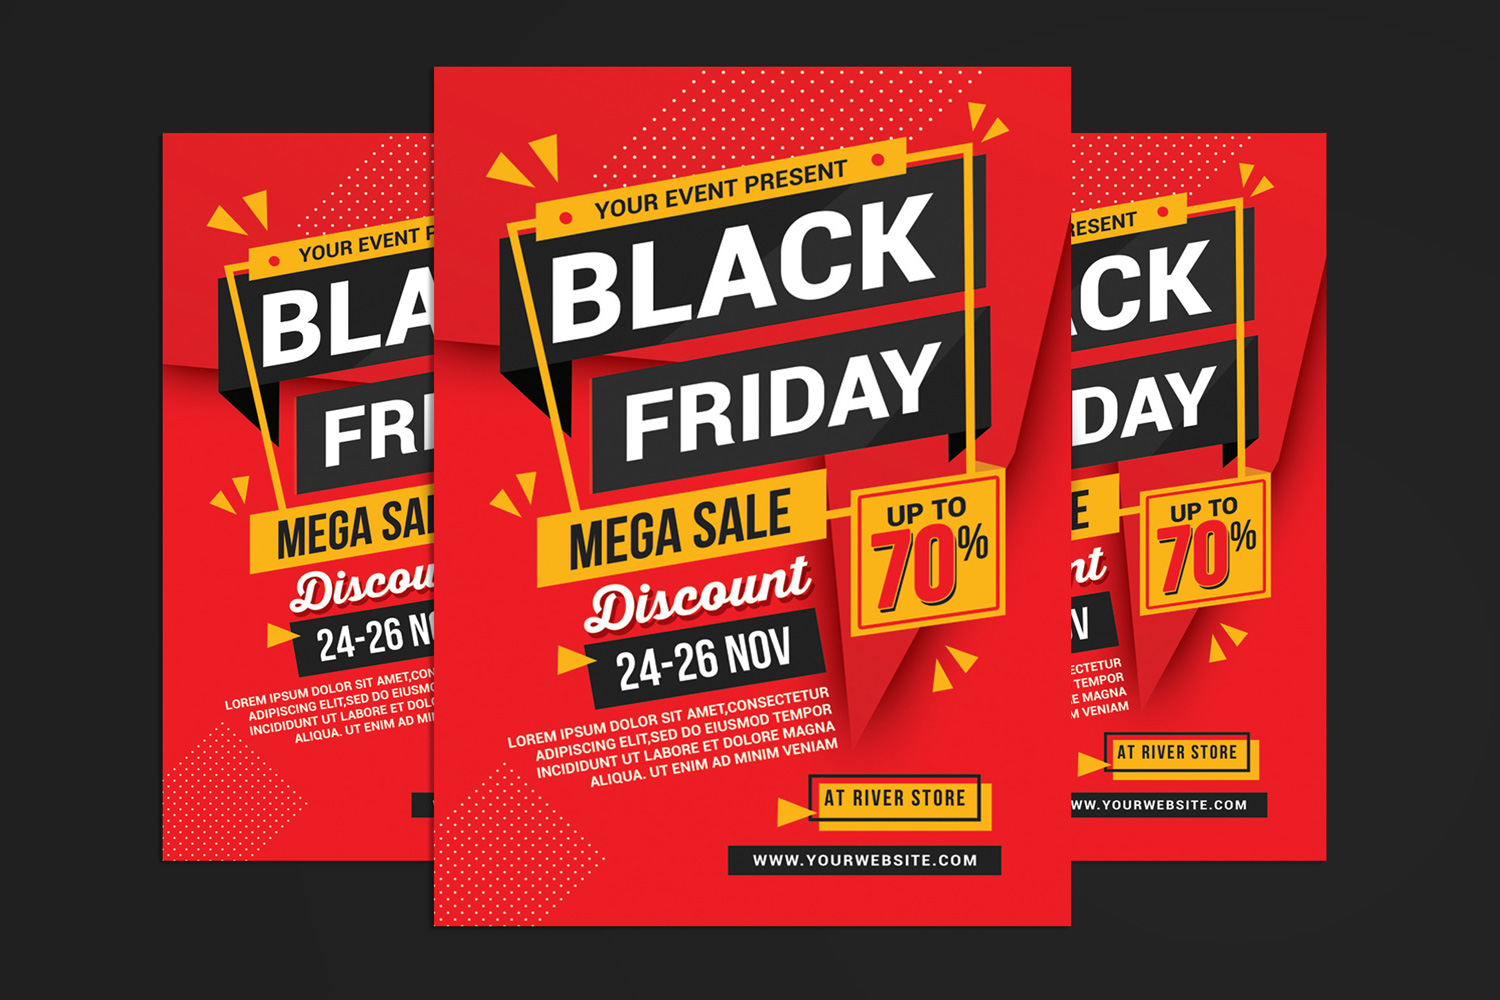 Black Friday Sale Event Flyer - Corporate Identity Template